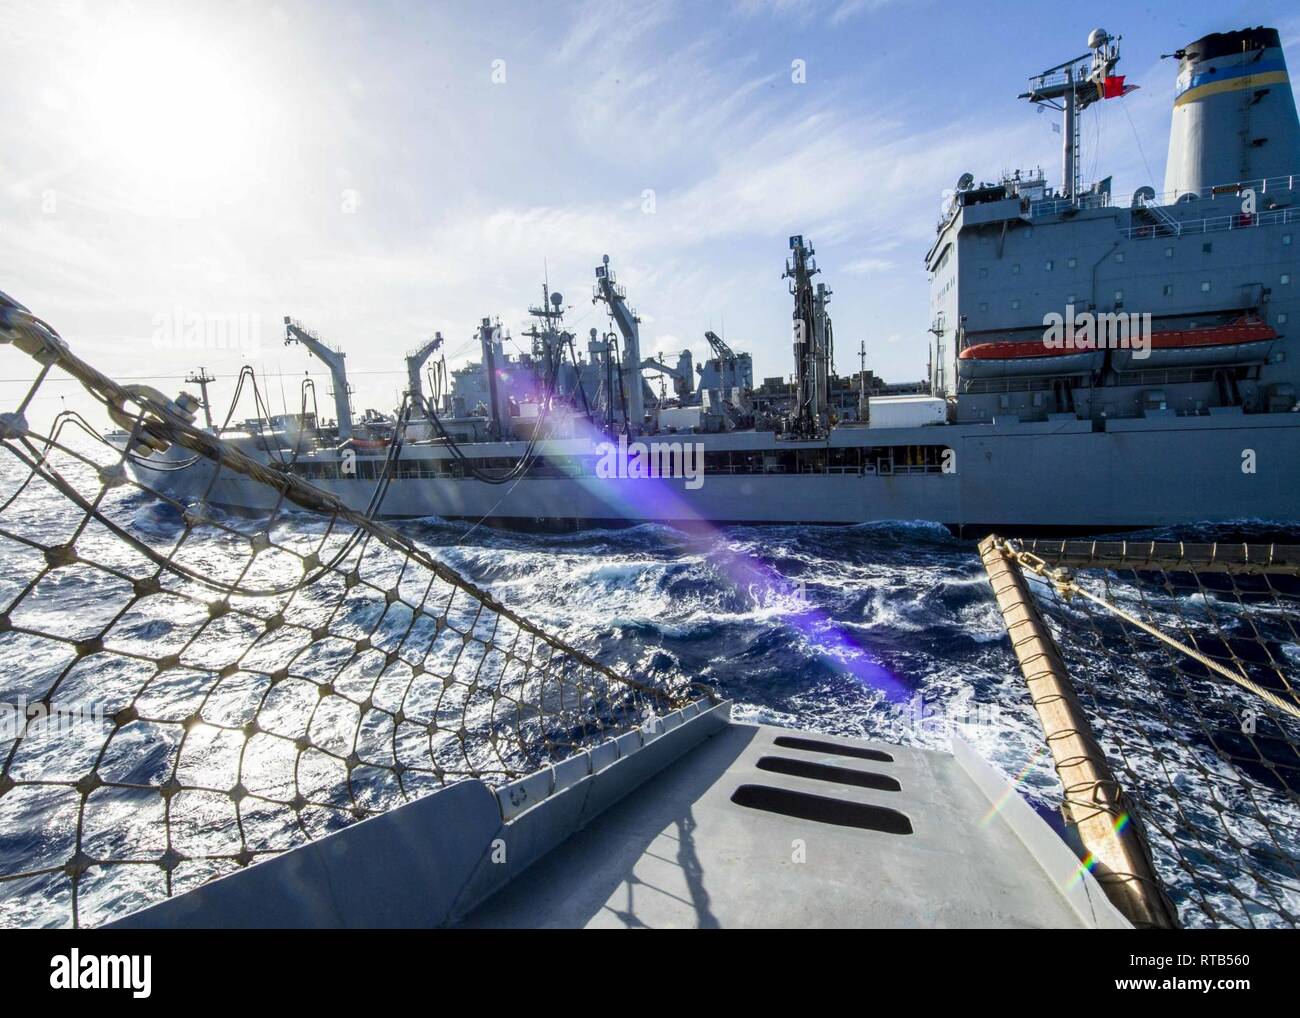 PACIFIC OCEAN (Feb. 7, 2019) The San Antonio-class amphibious transport dock ship USS Anchorage (LPD 23) participates in an underway replenishment with fleet replenishment oiler USNS Pecos (T-AO 197) while on a deployment of the Essex Amphibious Ready Group (ARG) and 13th Marine Expeditionary Unit (MEU). The Essex ARG/13th MEU is a capable and lethal Navy-Marine Corps team deployed to the 7th fleet area of operations to support regional stability, reassure partners and allies and maintain a presence postured to respond to any crisis ranging from humanitarian assistance to contingency operation Stock Photo